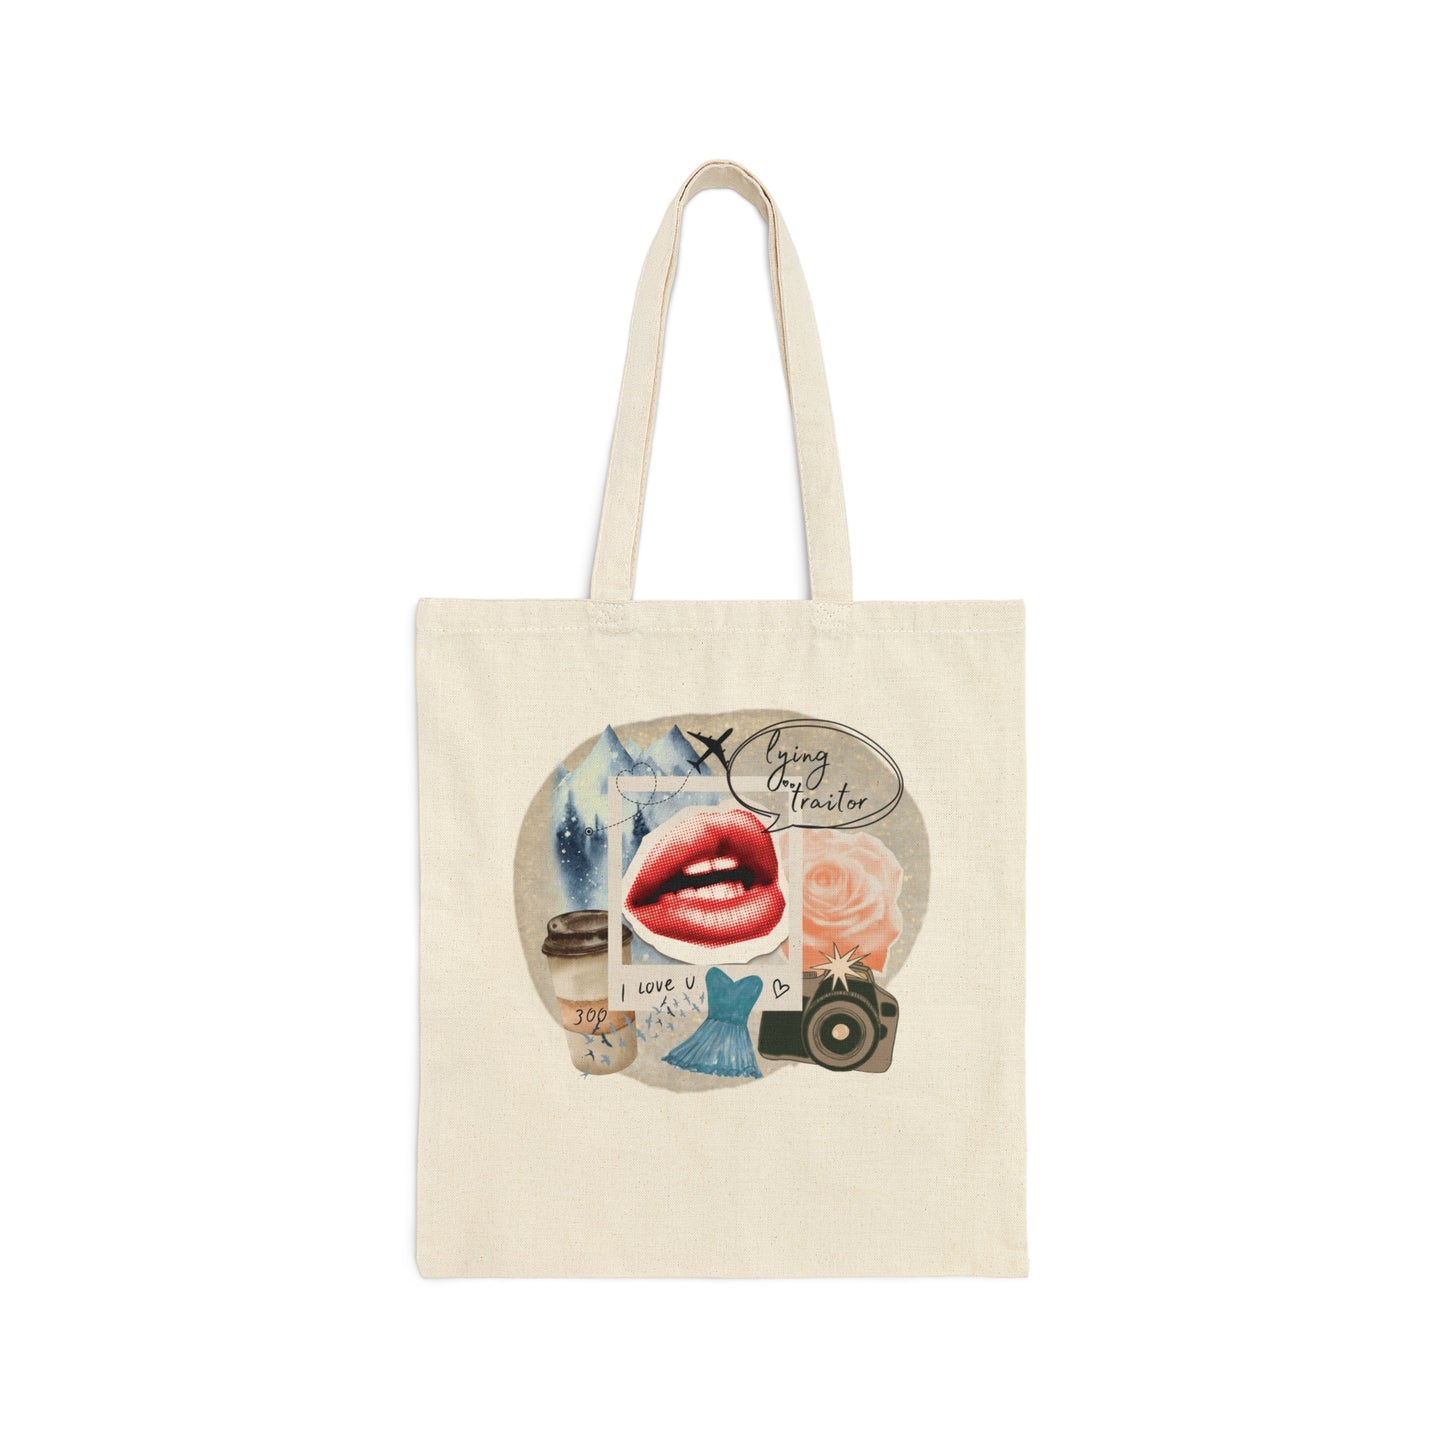 The Lying Traitor Tote